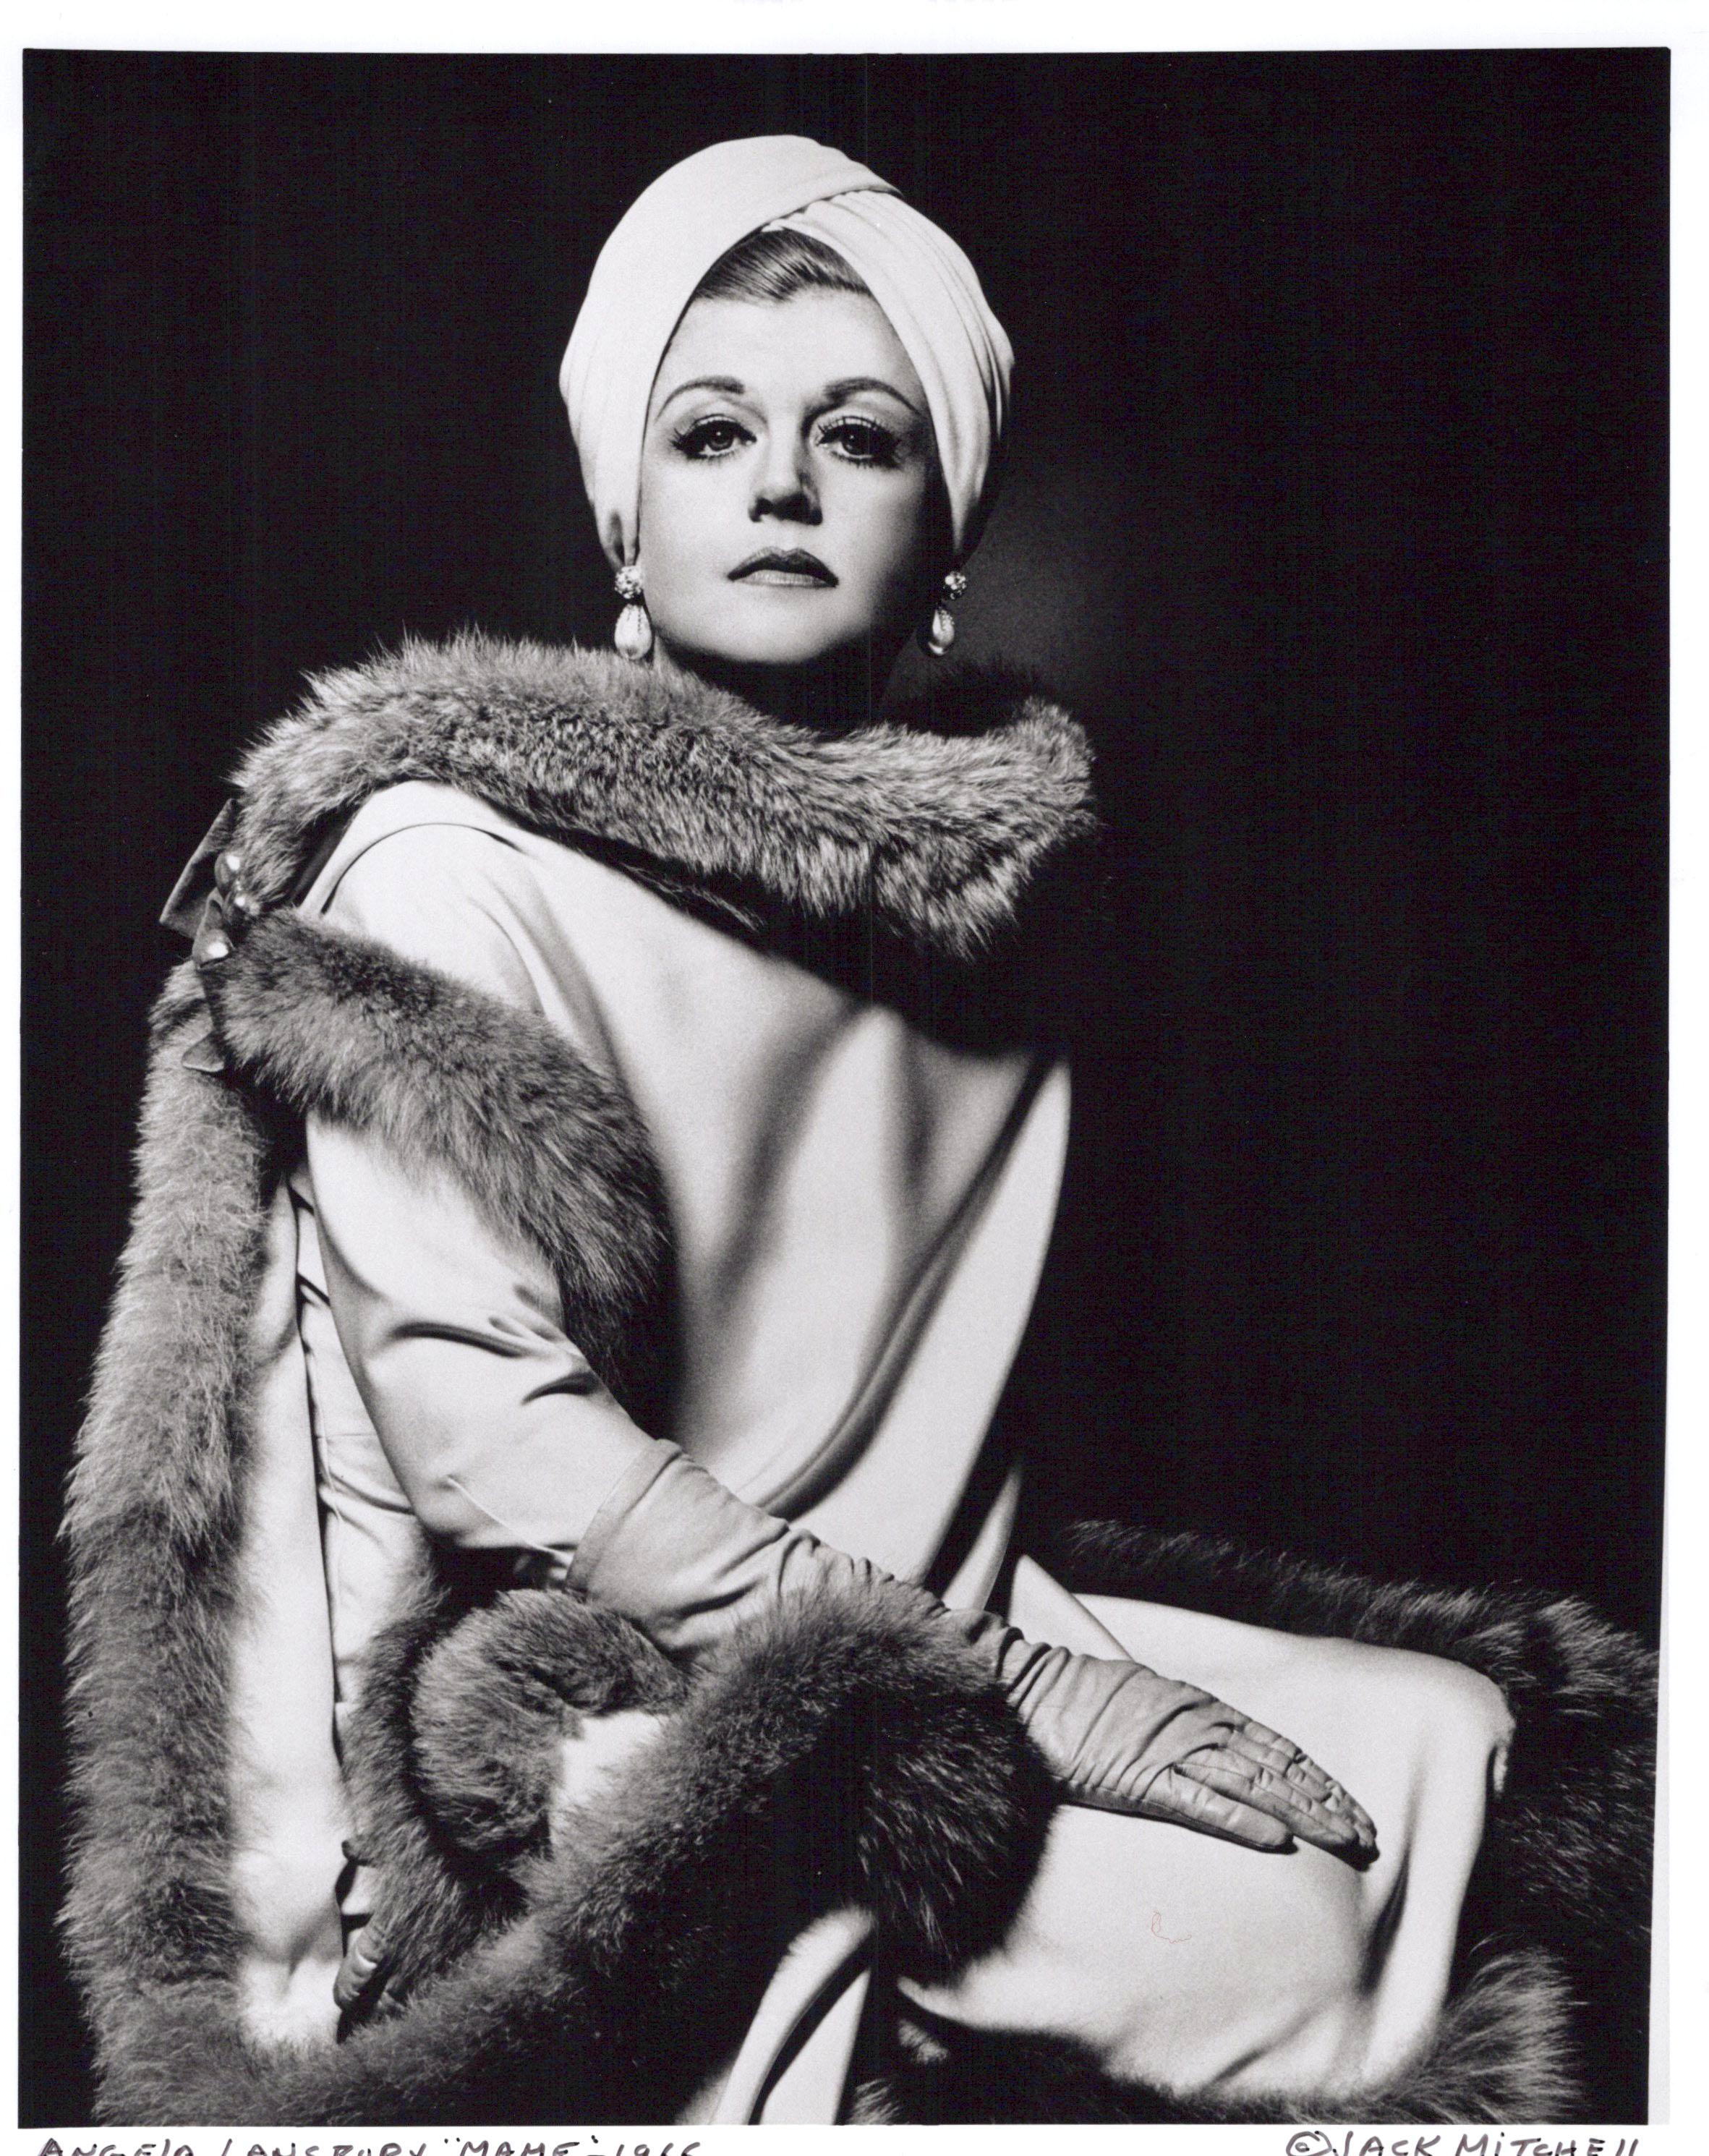 Jack Mitchell Black and White Photograph - Angela Lansbury in full costume for her starring role on Broadway as 'Mame'